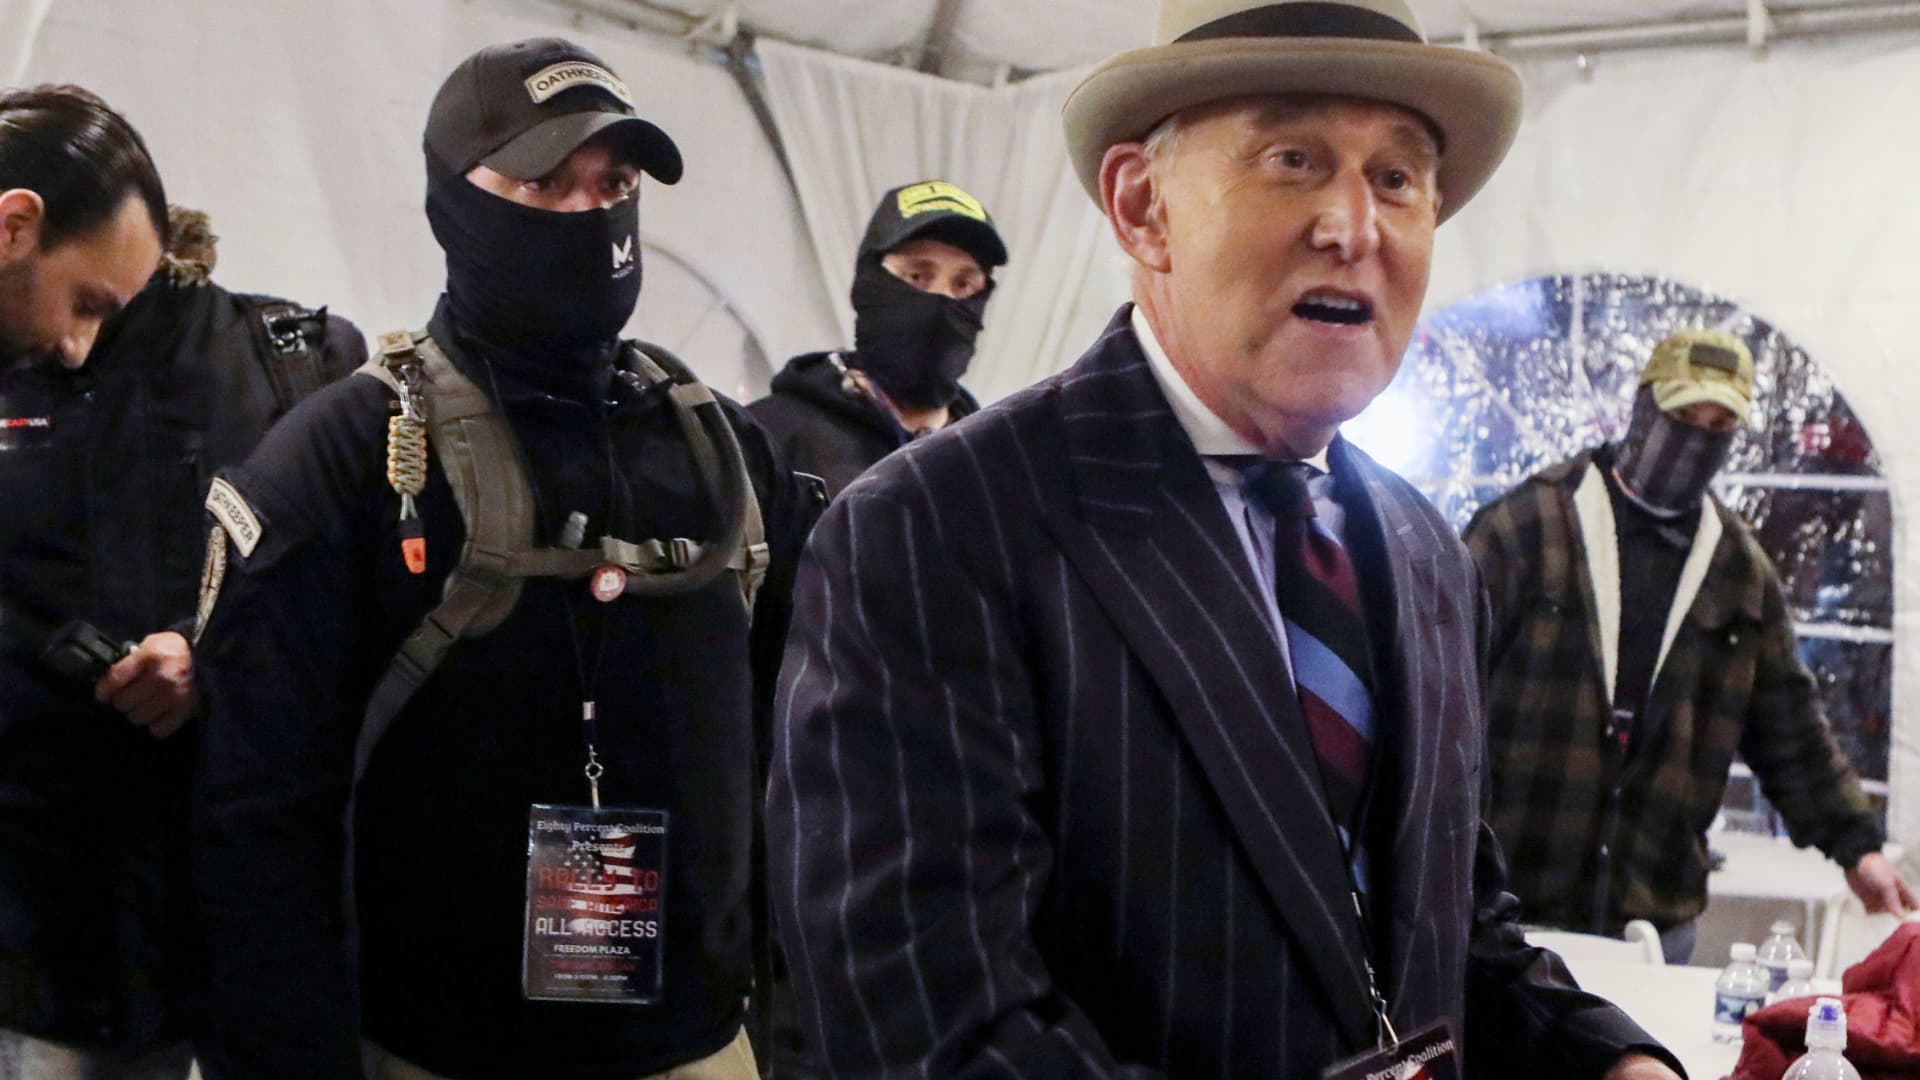 Members of the Oath Keepers provide security to Roger Stone at a rally the night before groups attacked the U.S. Capitol, in Washington, U.S., January 5, 2021.